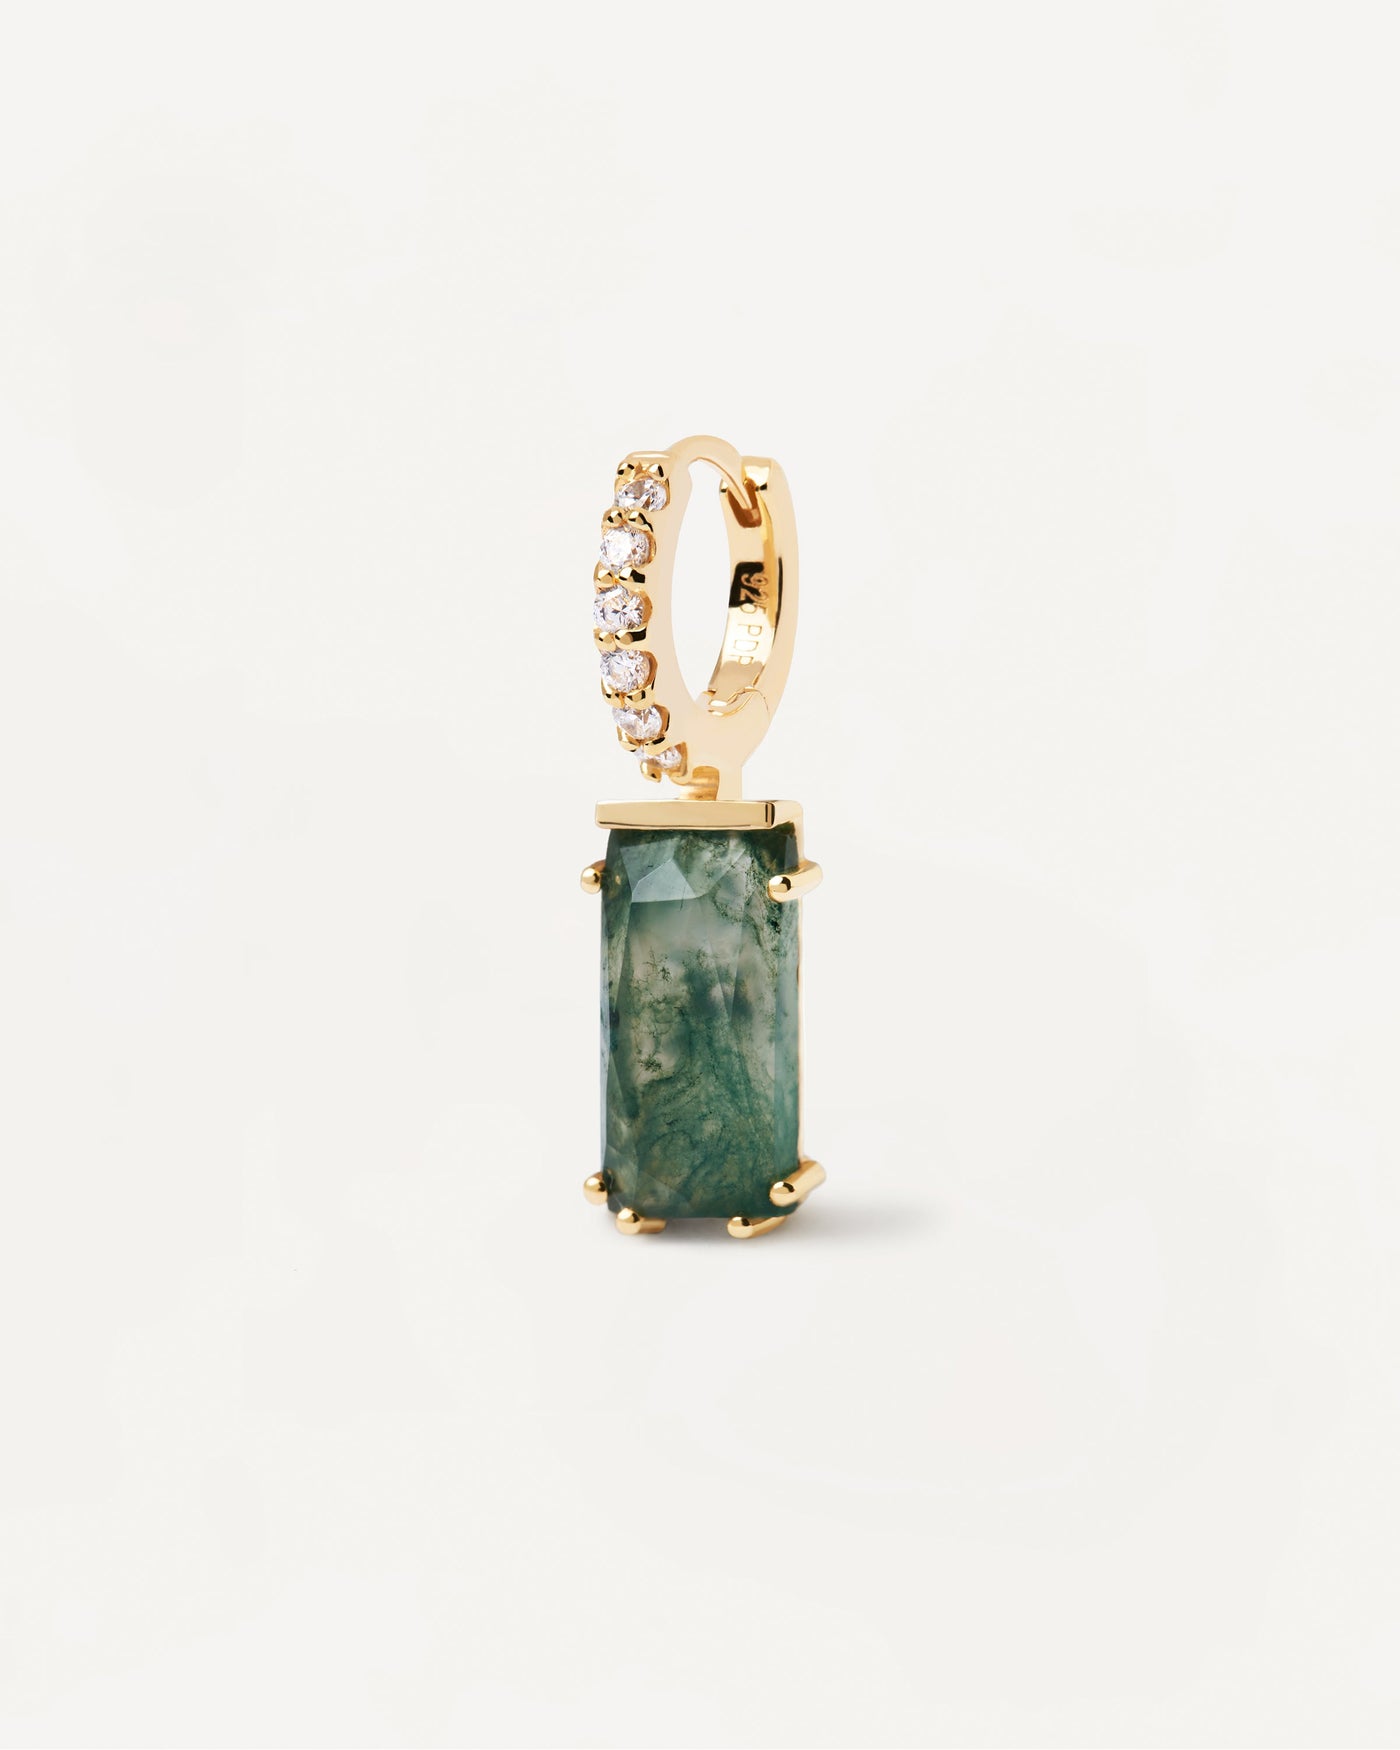 2023 Selection | Kaori Moss Agate Single Earring. Gold-plated hoop ear piercing with white zirconia and dark green rectangular gemstone pendant. Get the latest arrival from PDPAOLA. Place your order safely and get this Best Seller. Free Shipping.